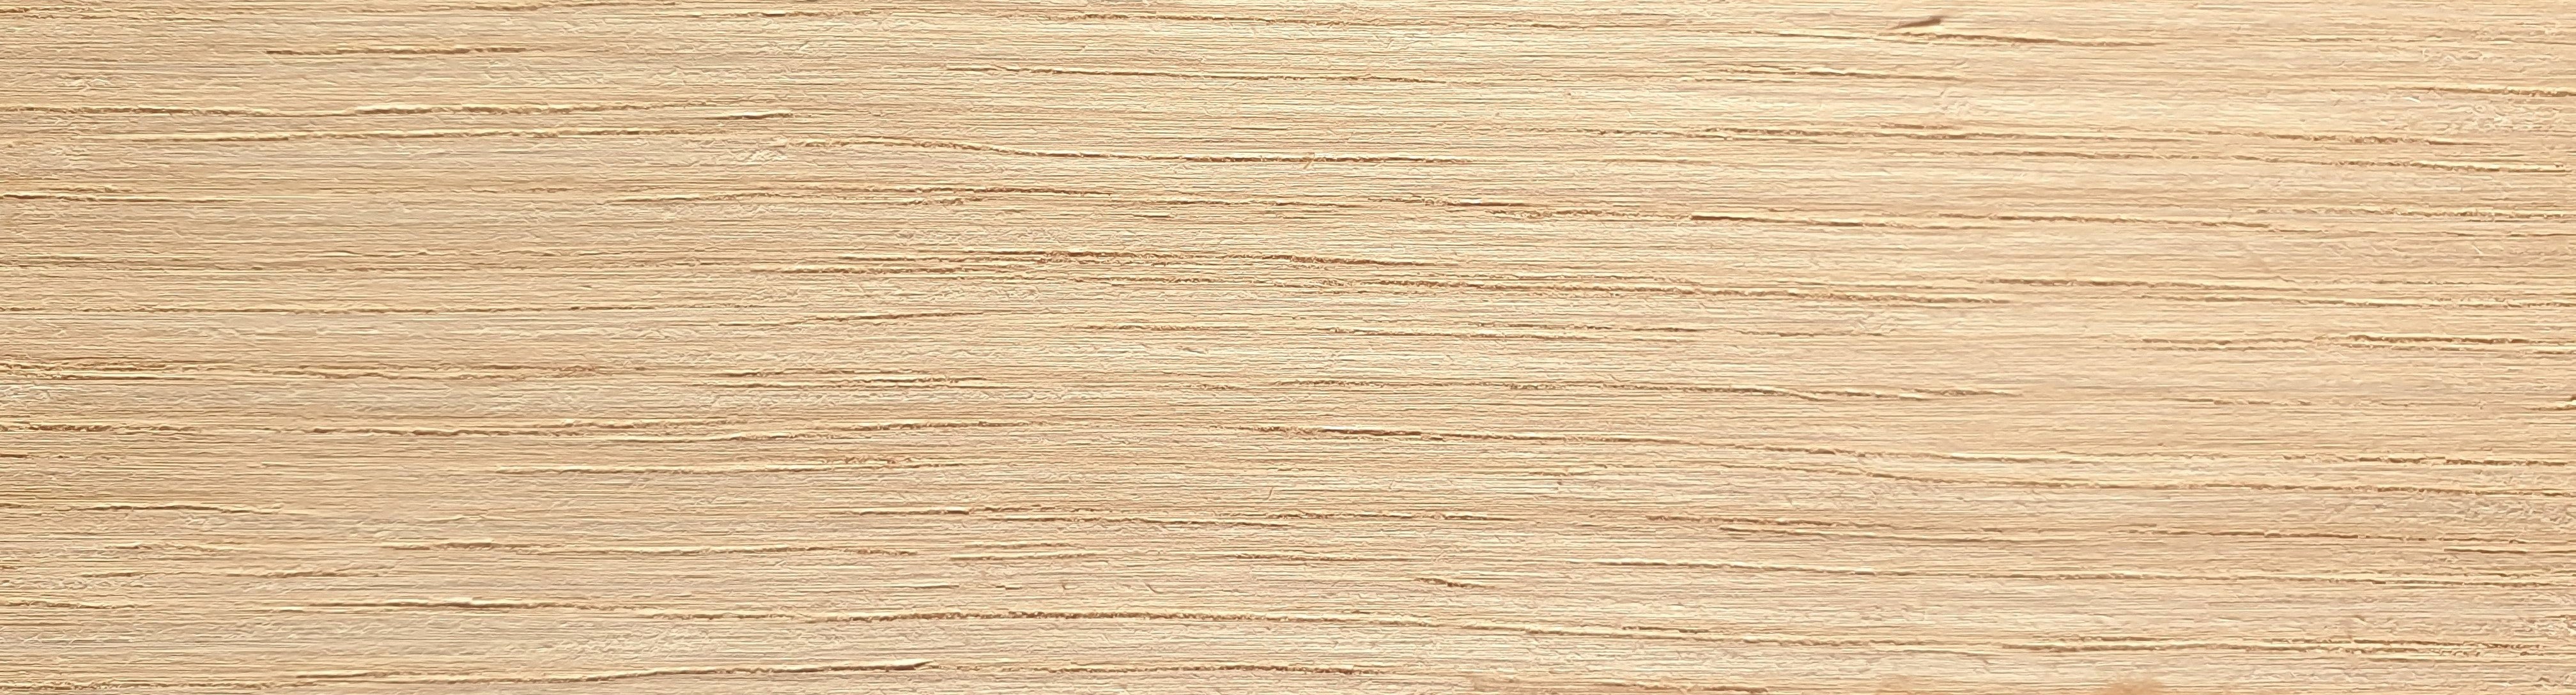 American White Oak Thickwood Unglued Edging / Lipping 22mm x 1mm Thick Oak Wood Edging